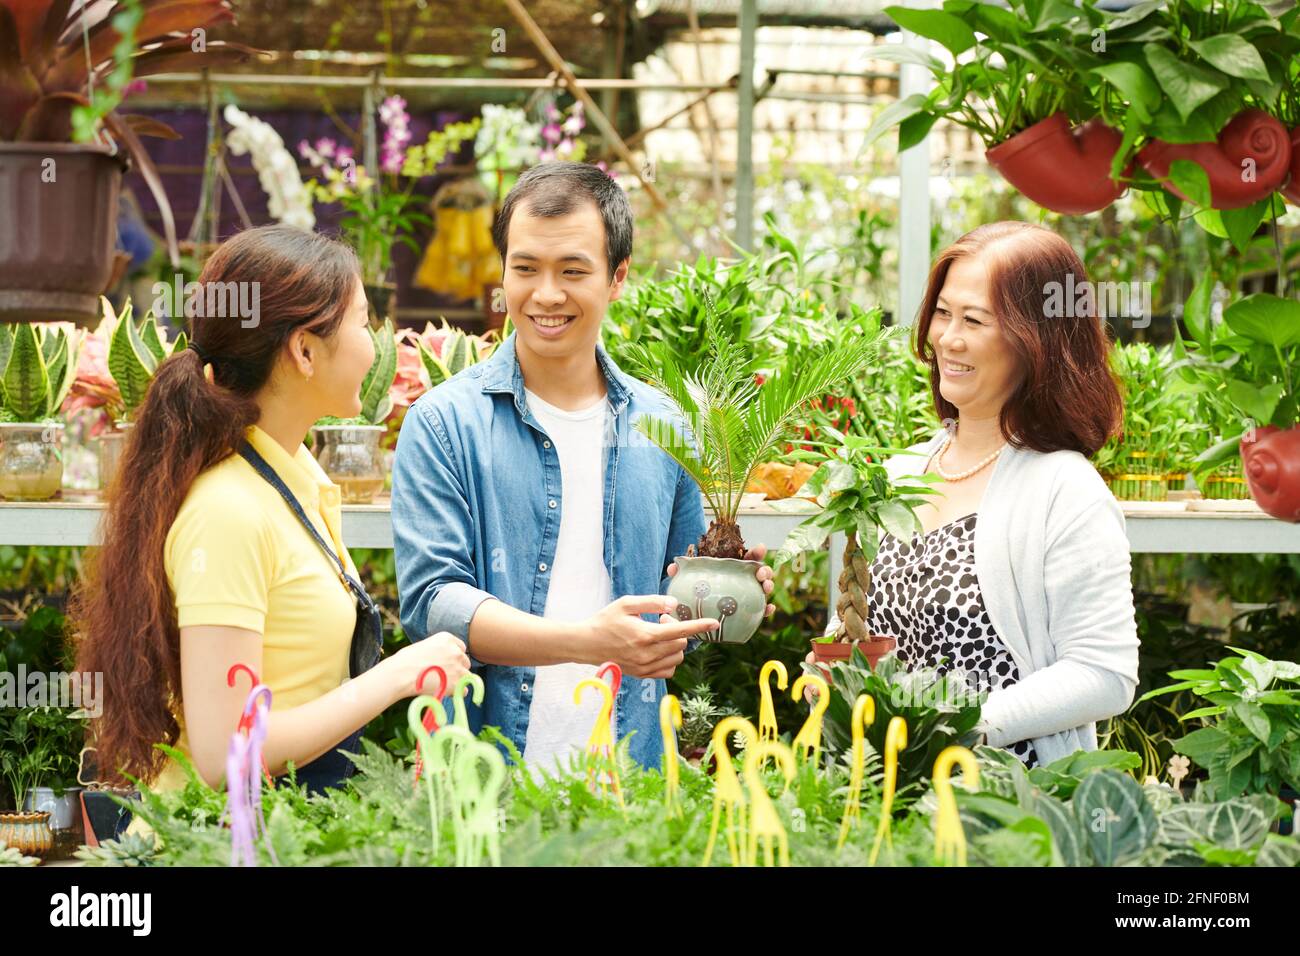 Gardening center worker asking customerd if they need help with choosing cycas plant Stock Photo